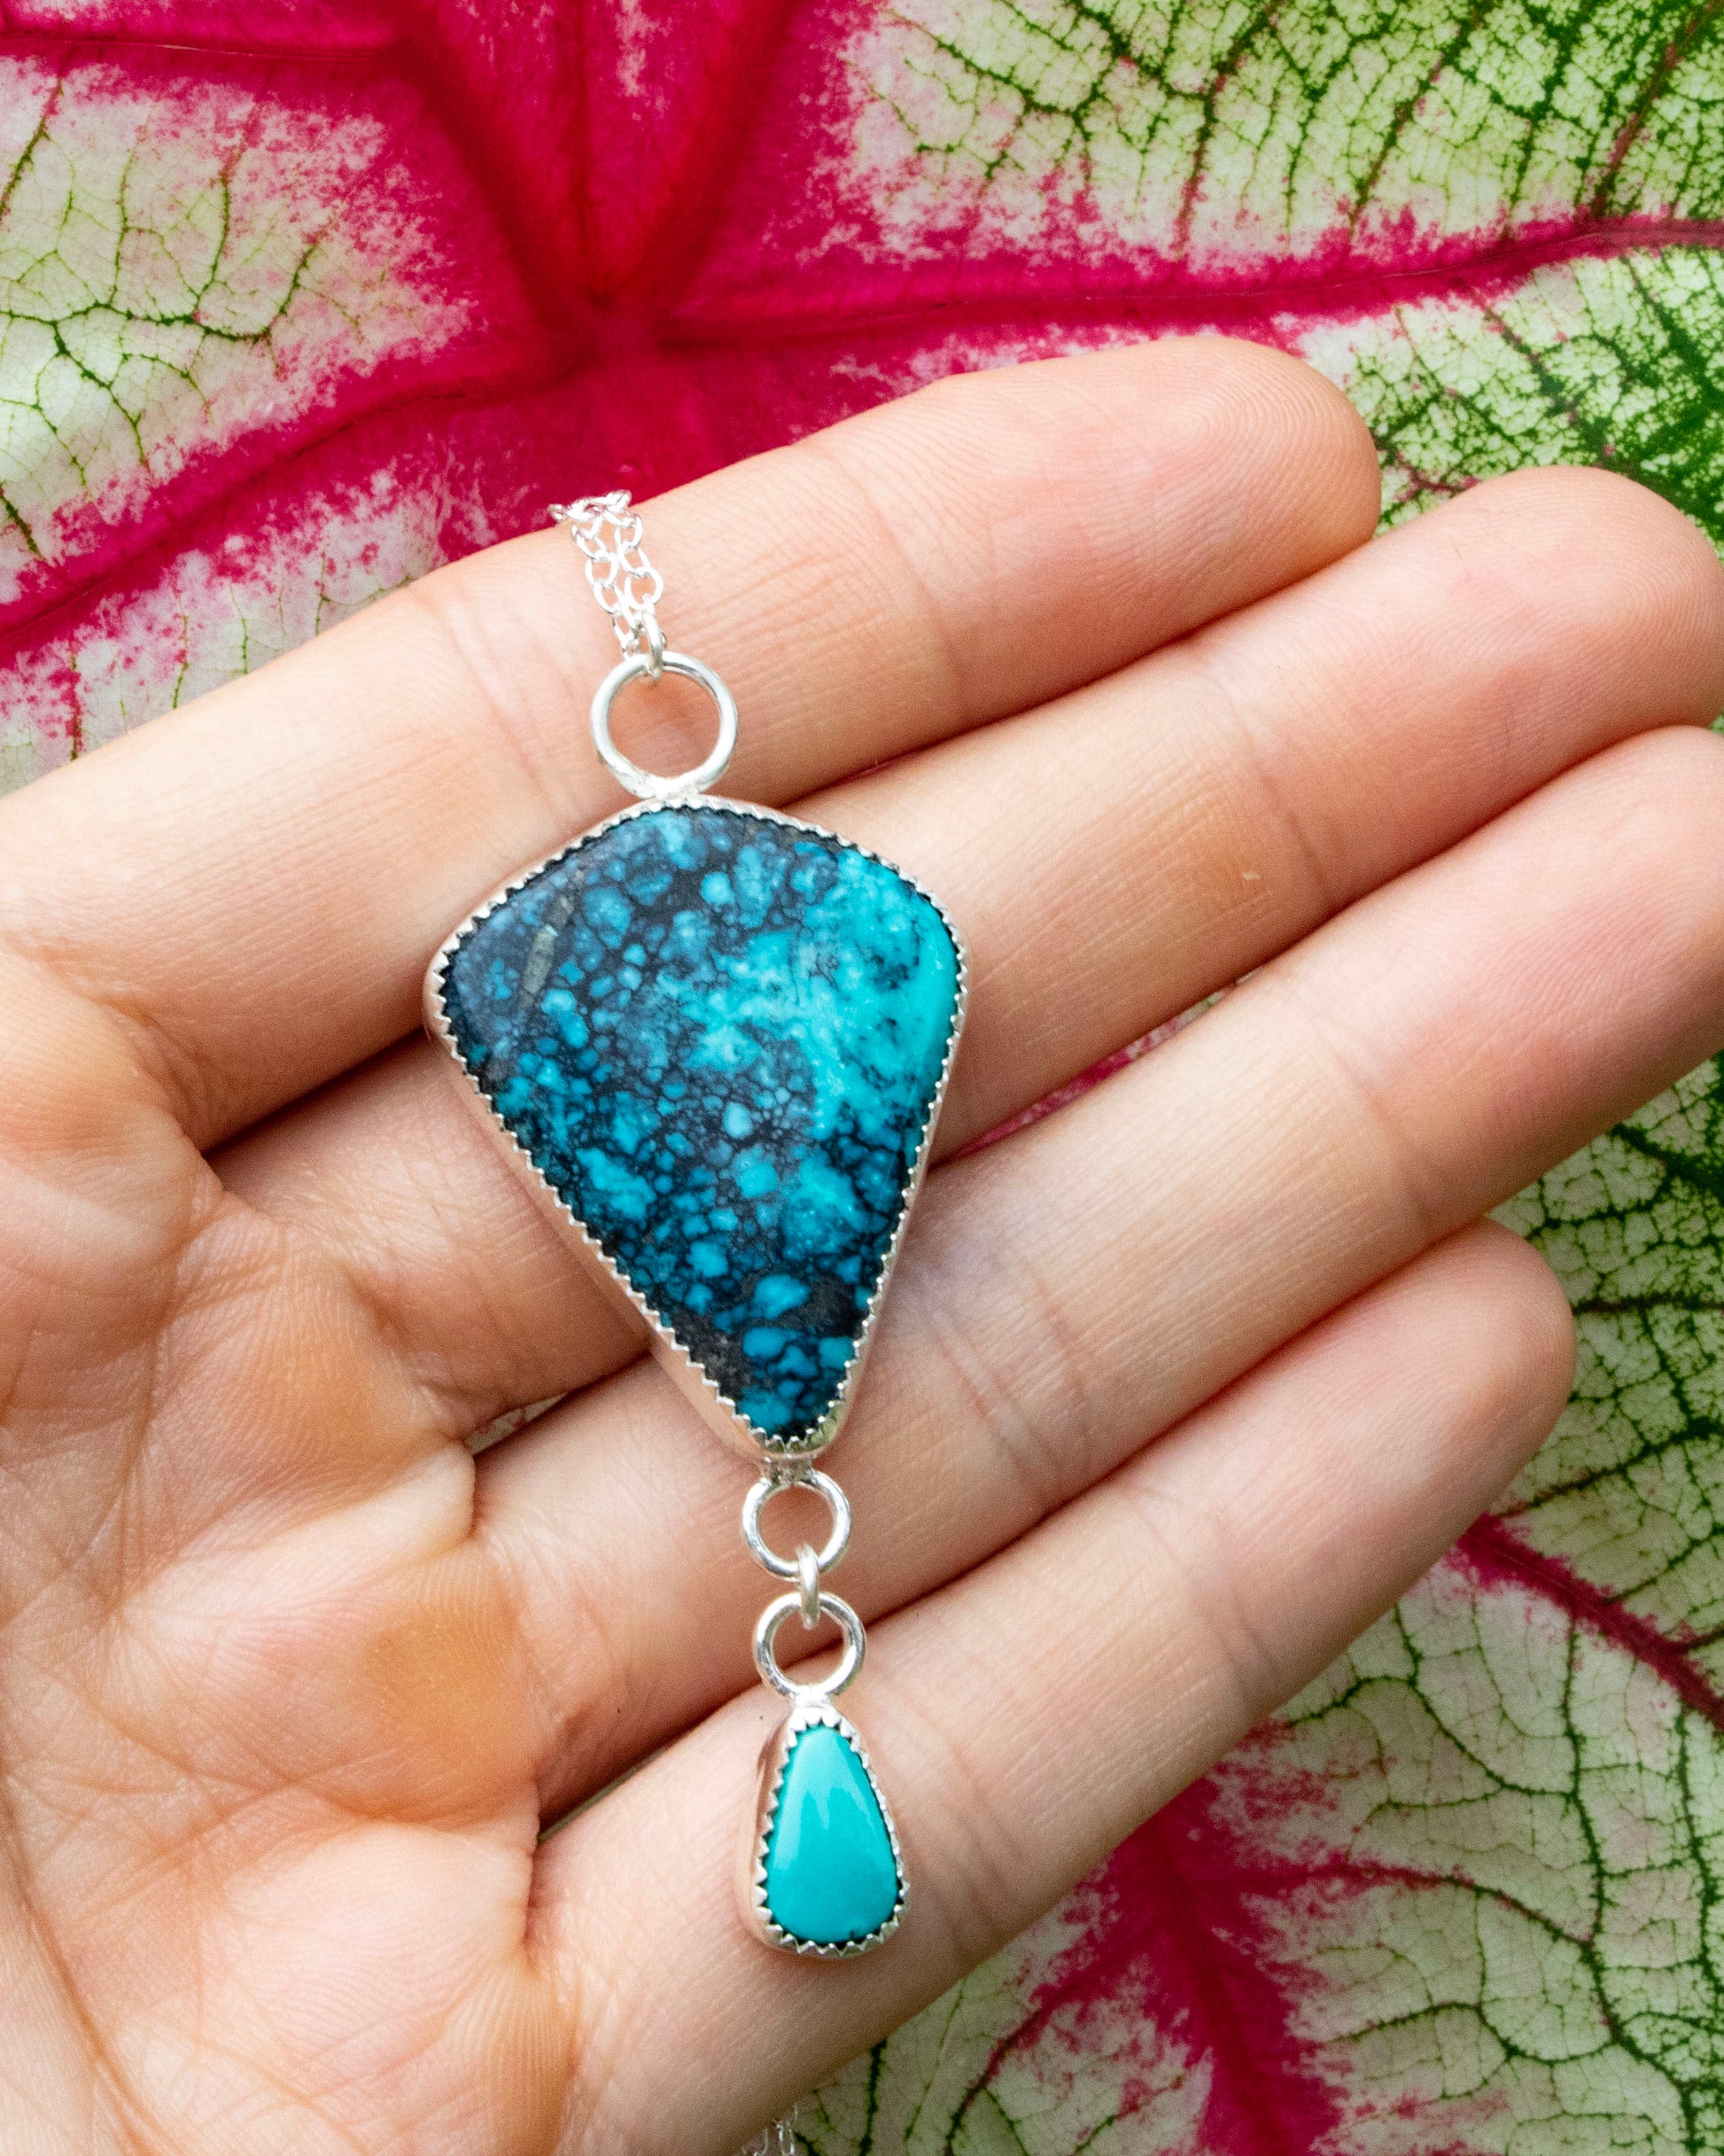 Moon River Turquoise kite sterling silver necklace with carico lake turquoise accent hung from a short jump ring chain at bottom of moon rivere stone. Necklace is being held in front of red veins of white and green leaf 